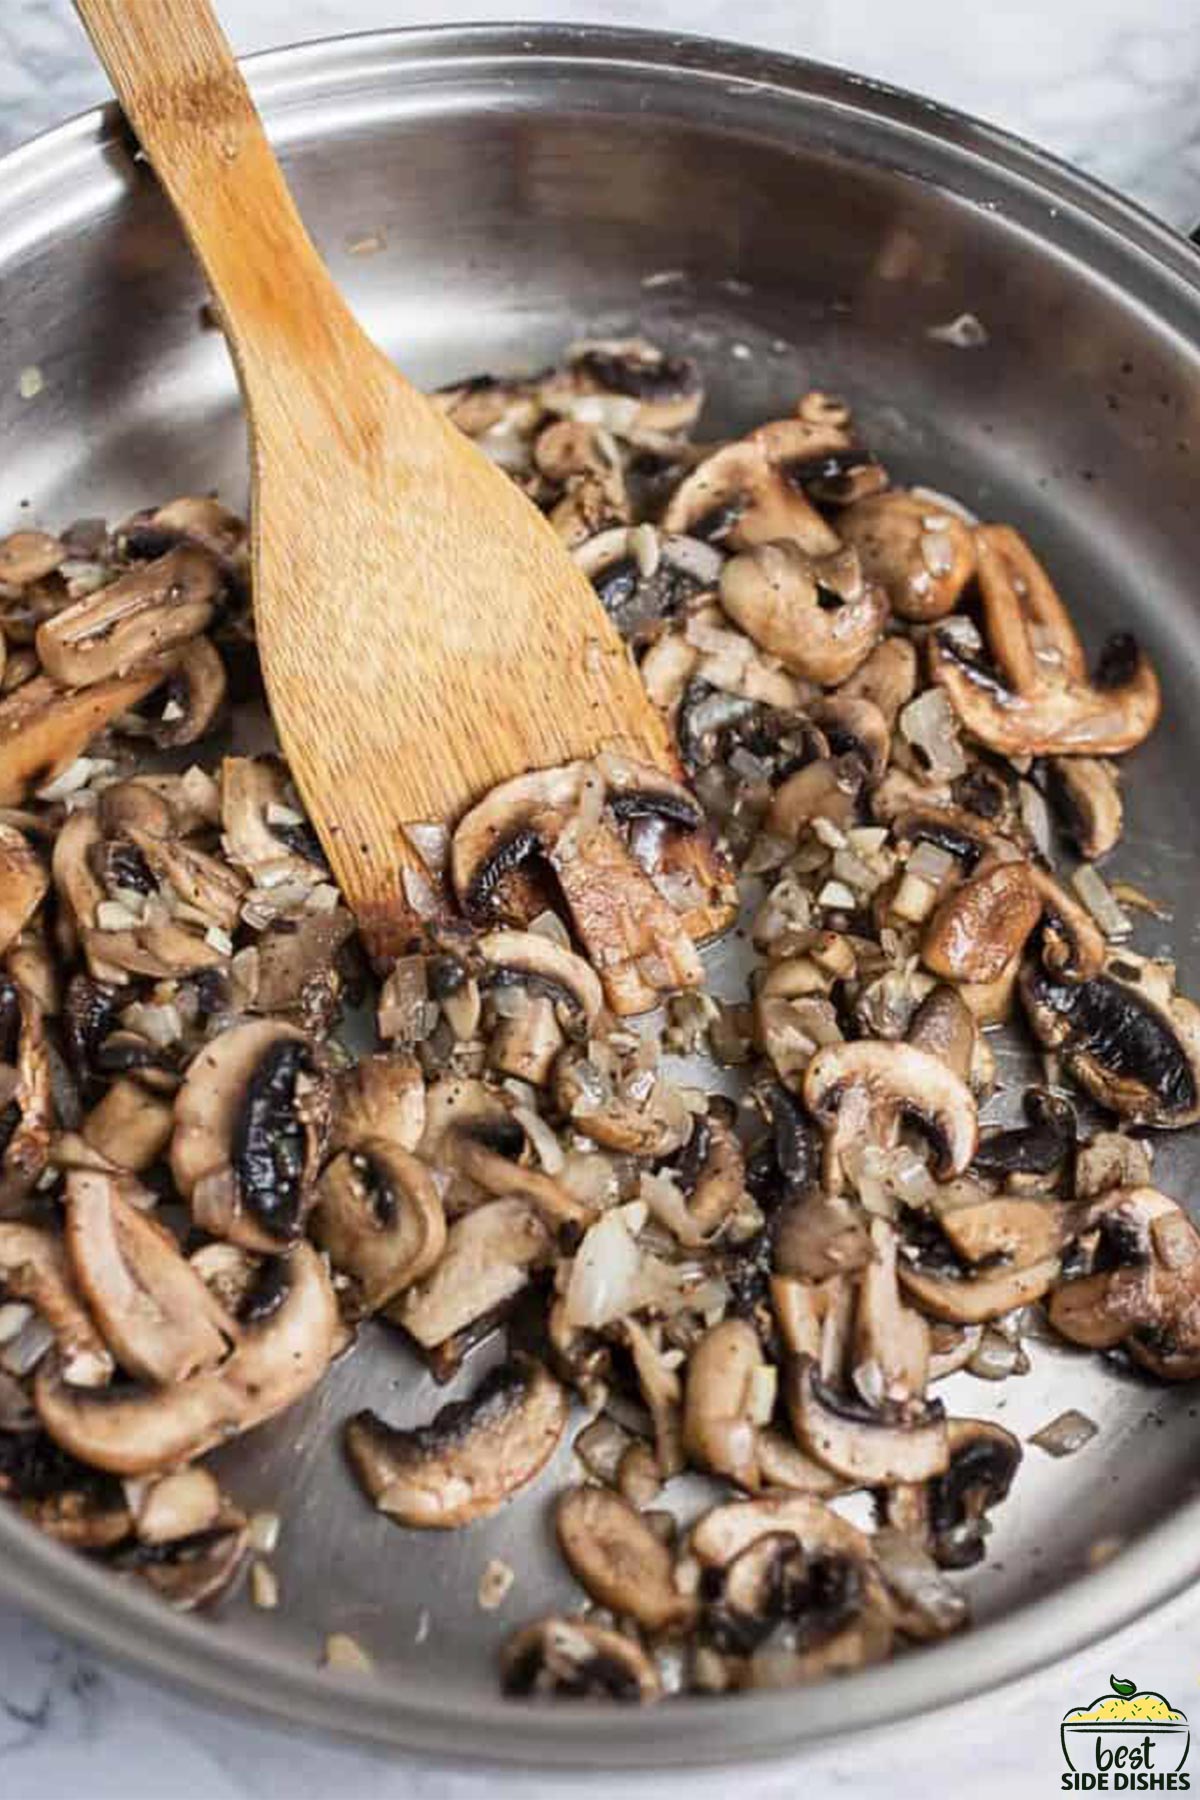 Sauteing mushrooms in a skillet